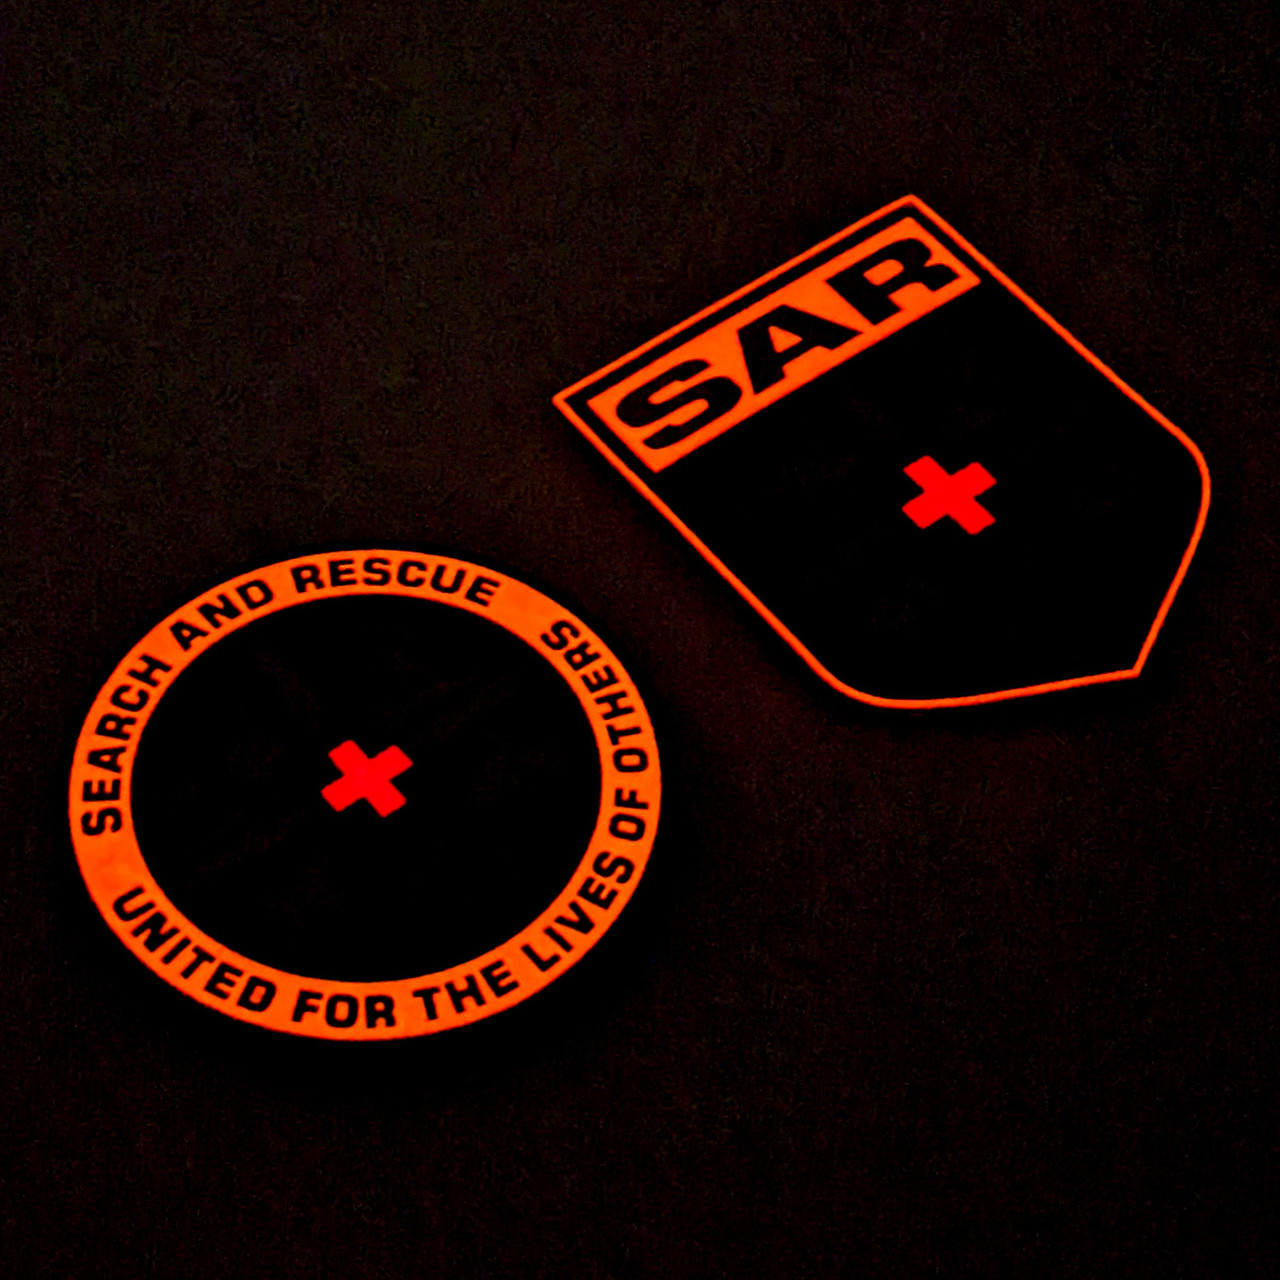 SAR (Search and Rescue) - 2x3 Patch, Black